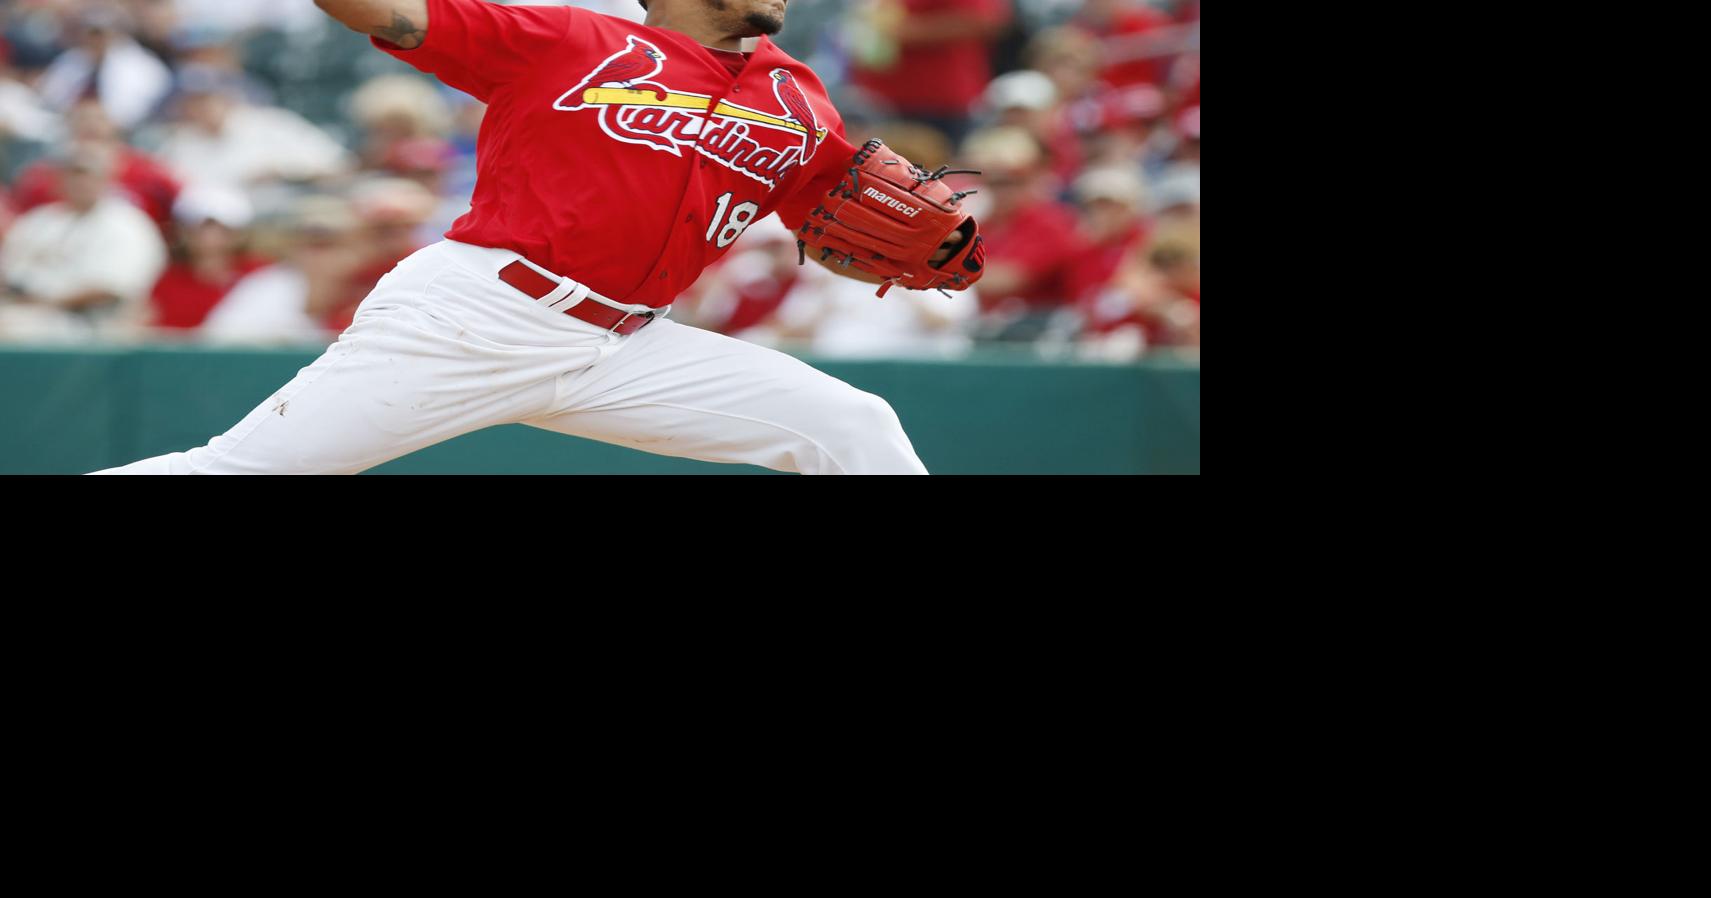 LEADING OFF: Cardinals getting playful with pitching staff - The